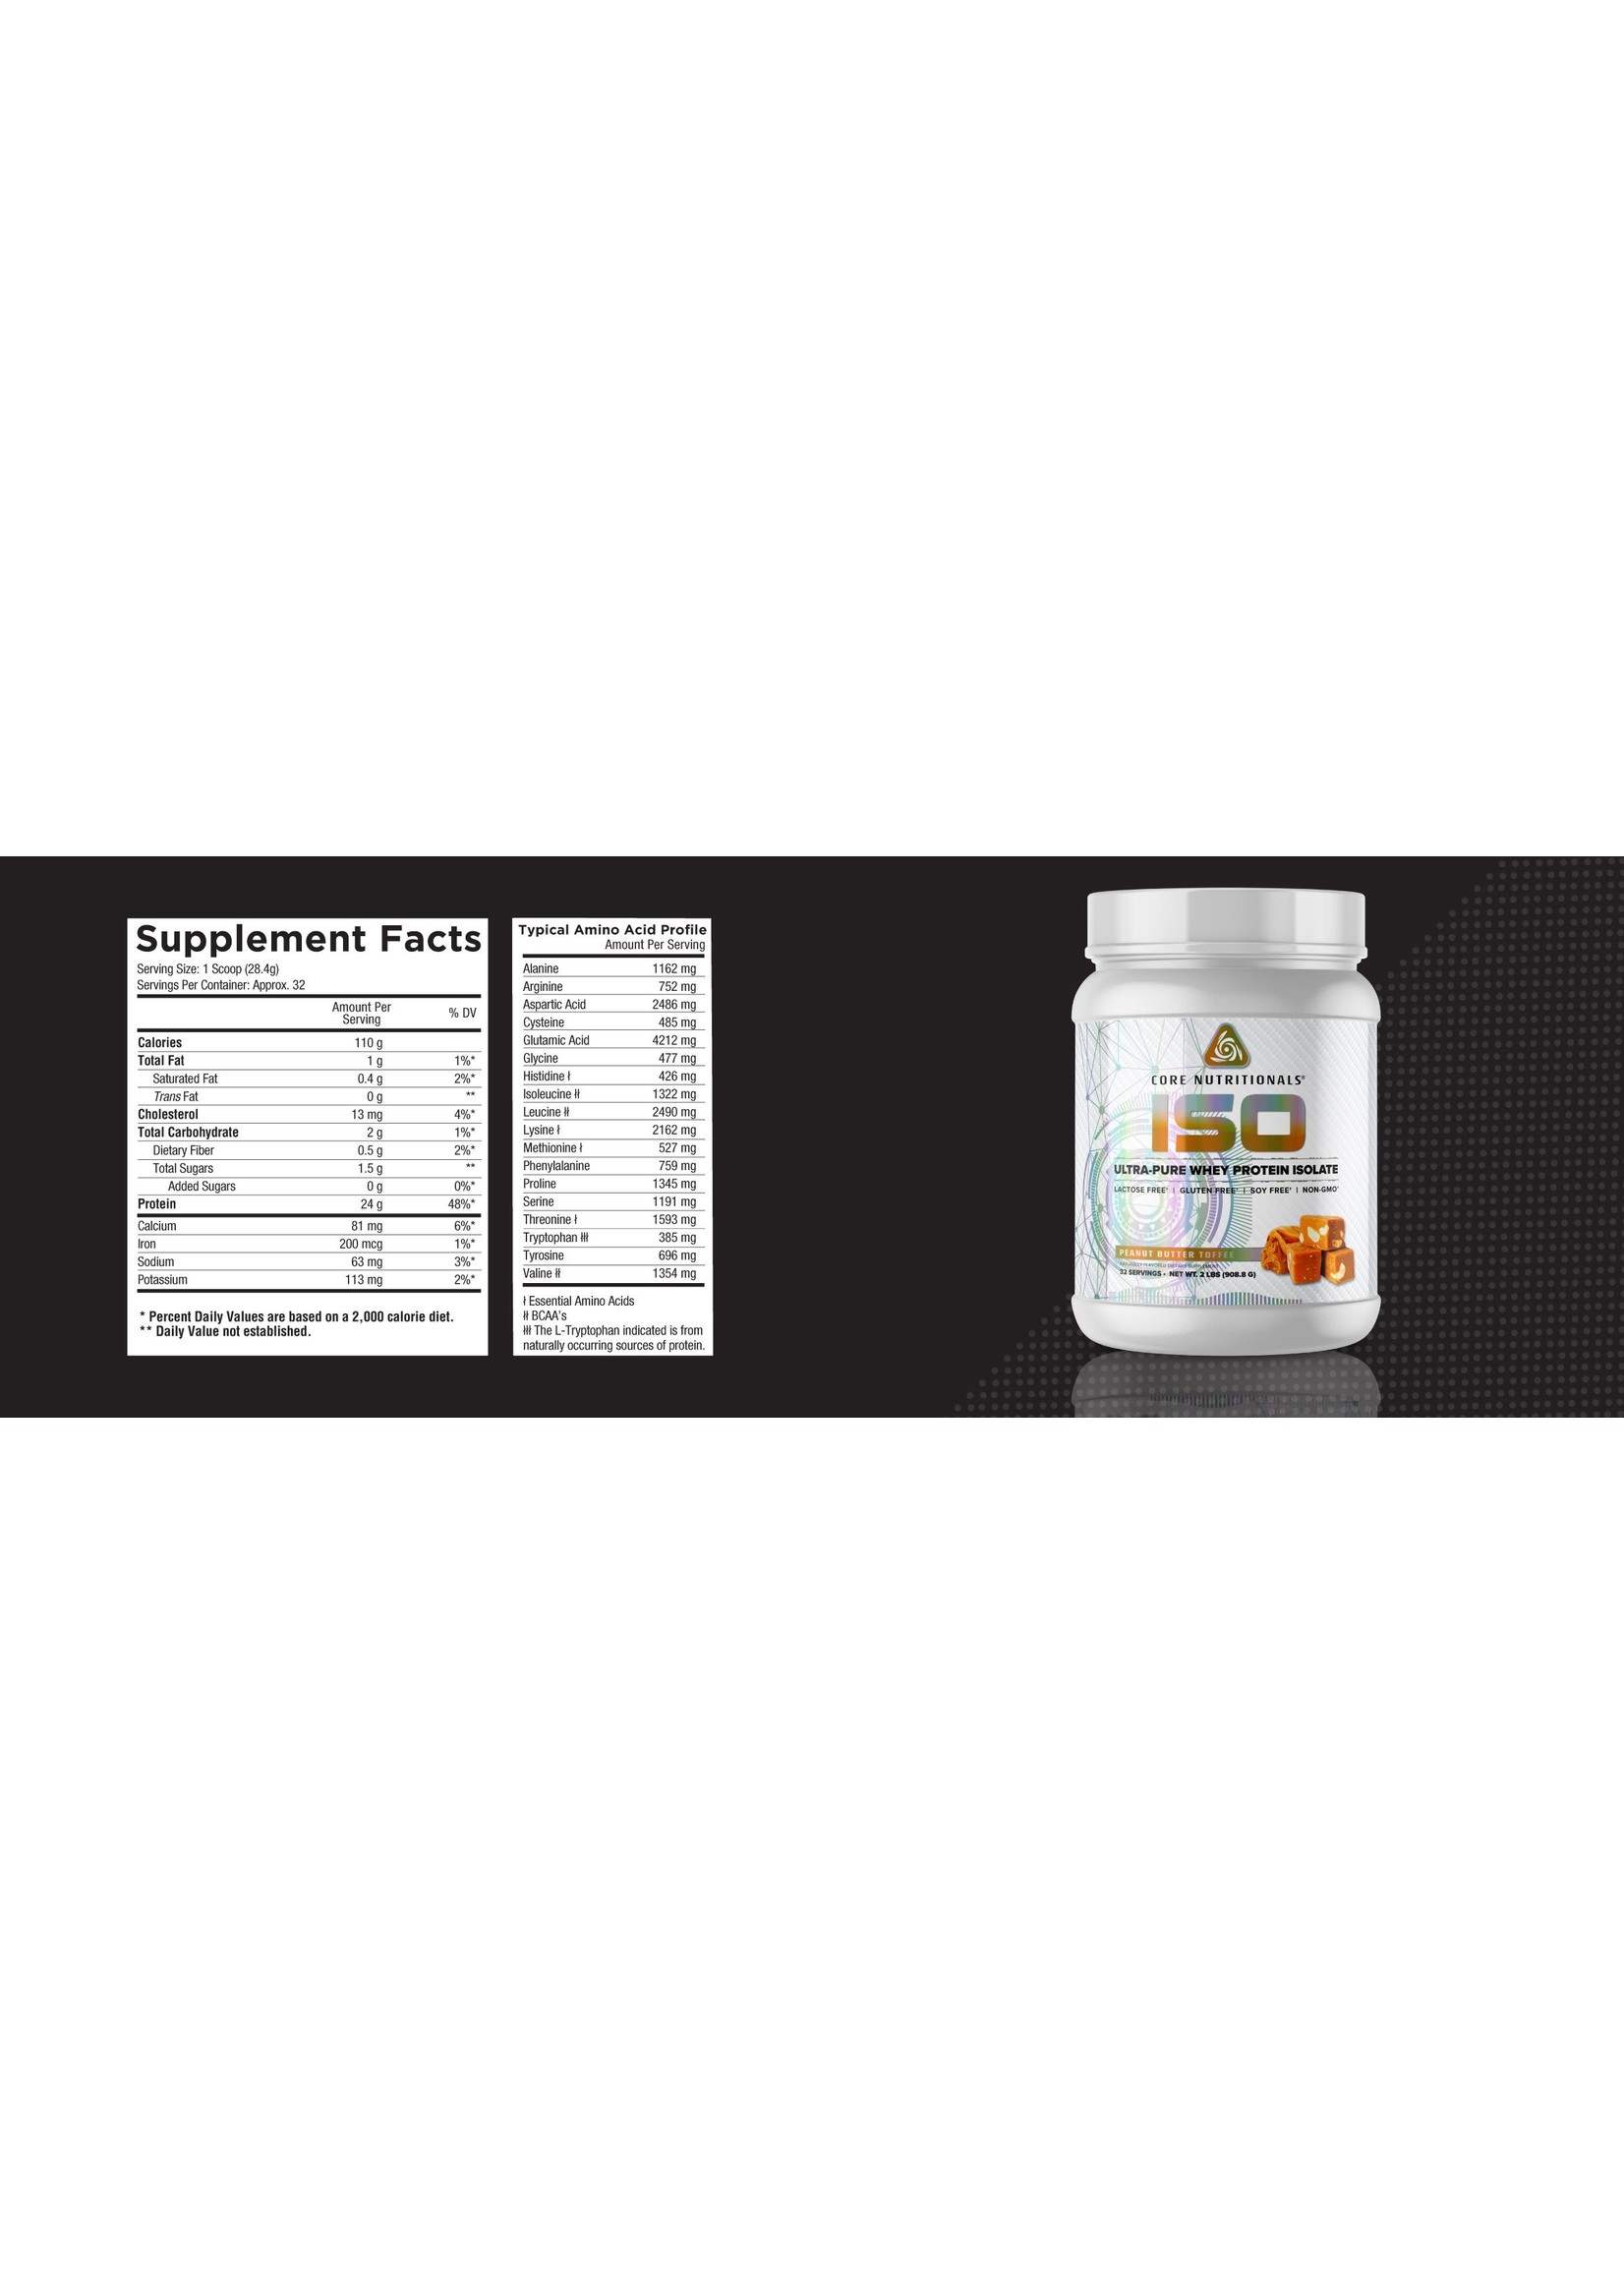 Core Nutritionals Core Iso